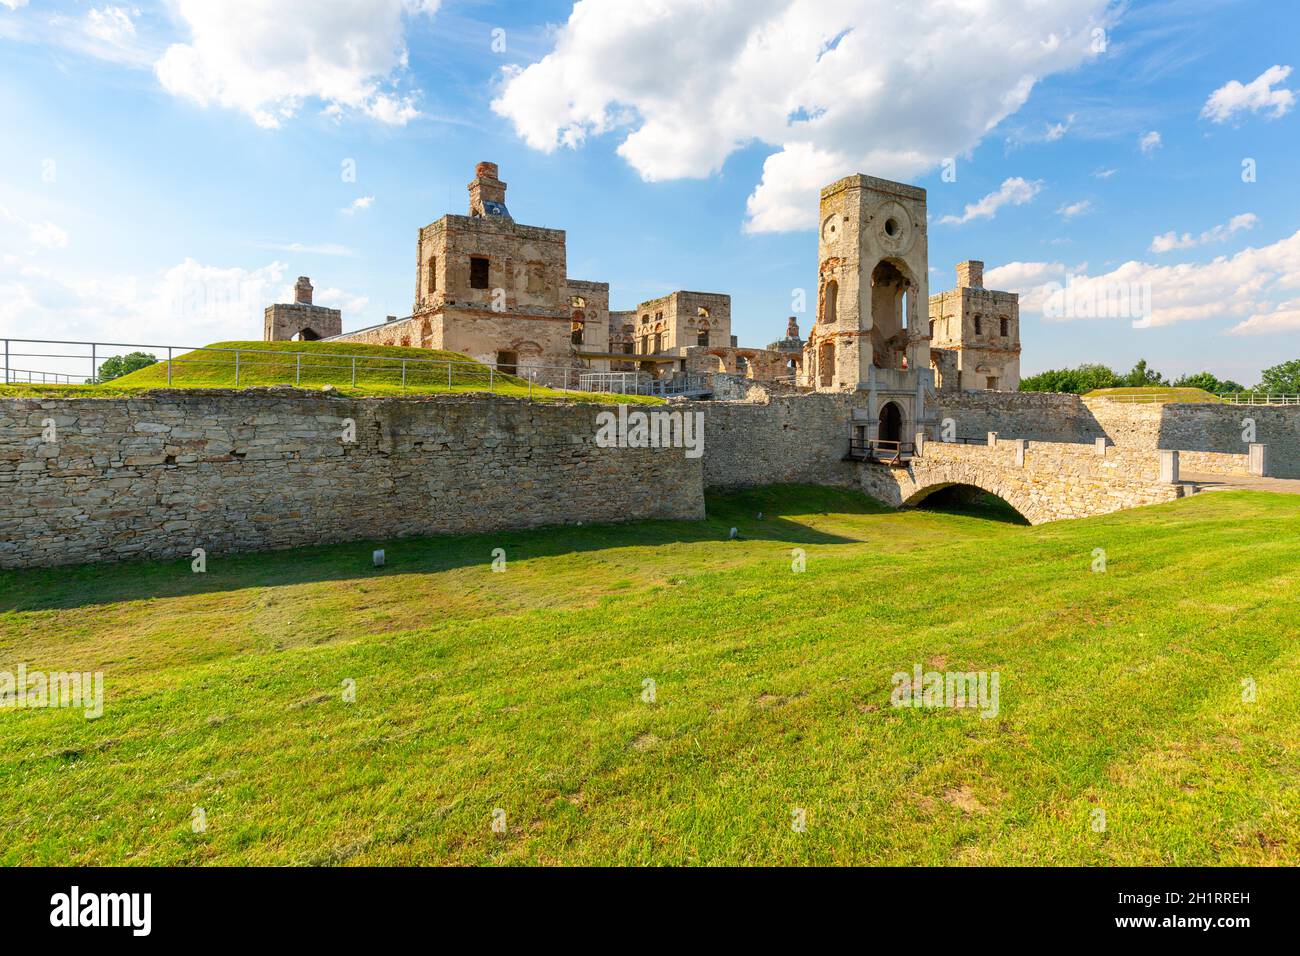 Ujazd, Poland - July 10, 2020 : Ruins of 17th century castle  Krzyztopor, italian style palazzo in fortezza. It was built by a Polish nobleman and Voi Stock Photo